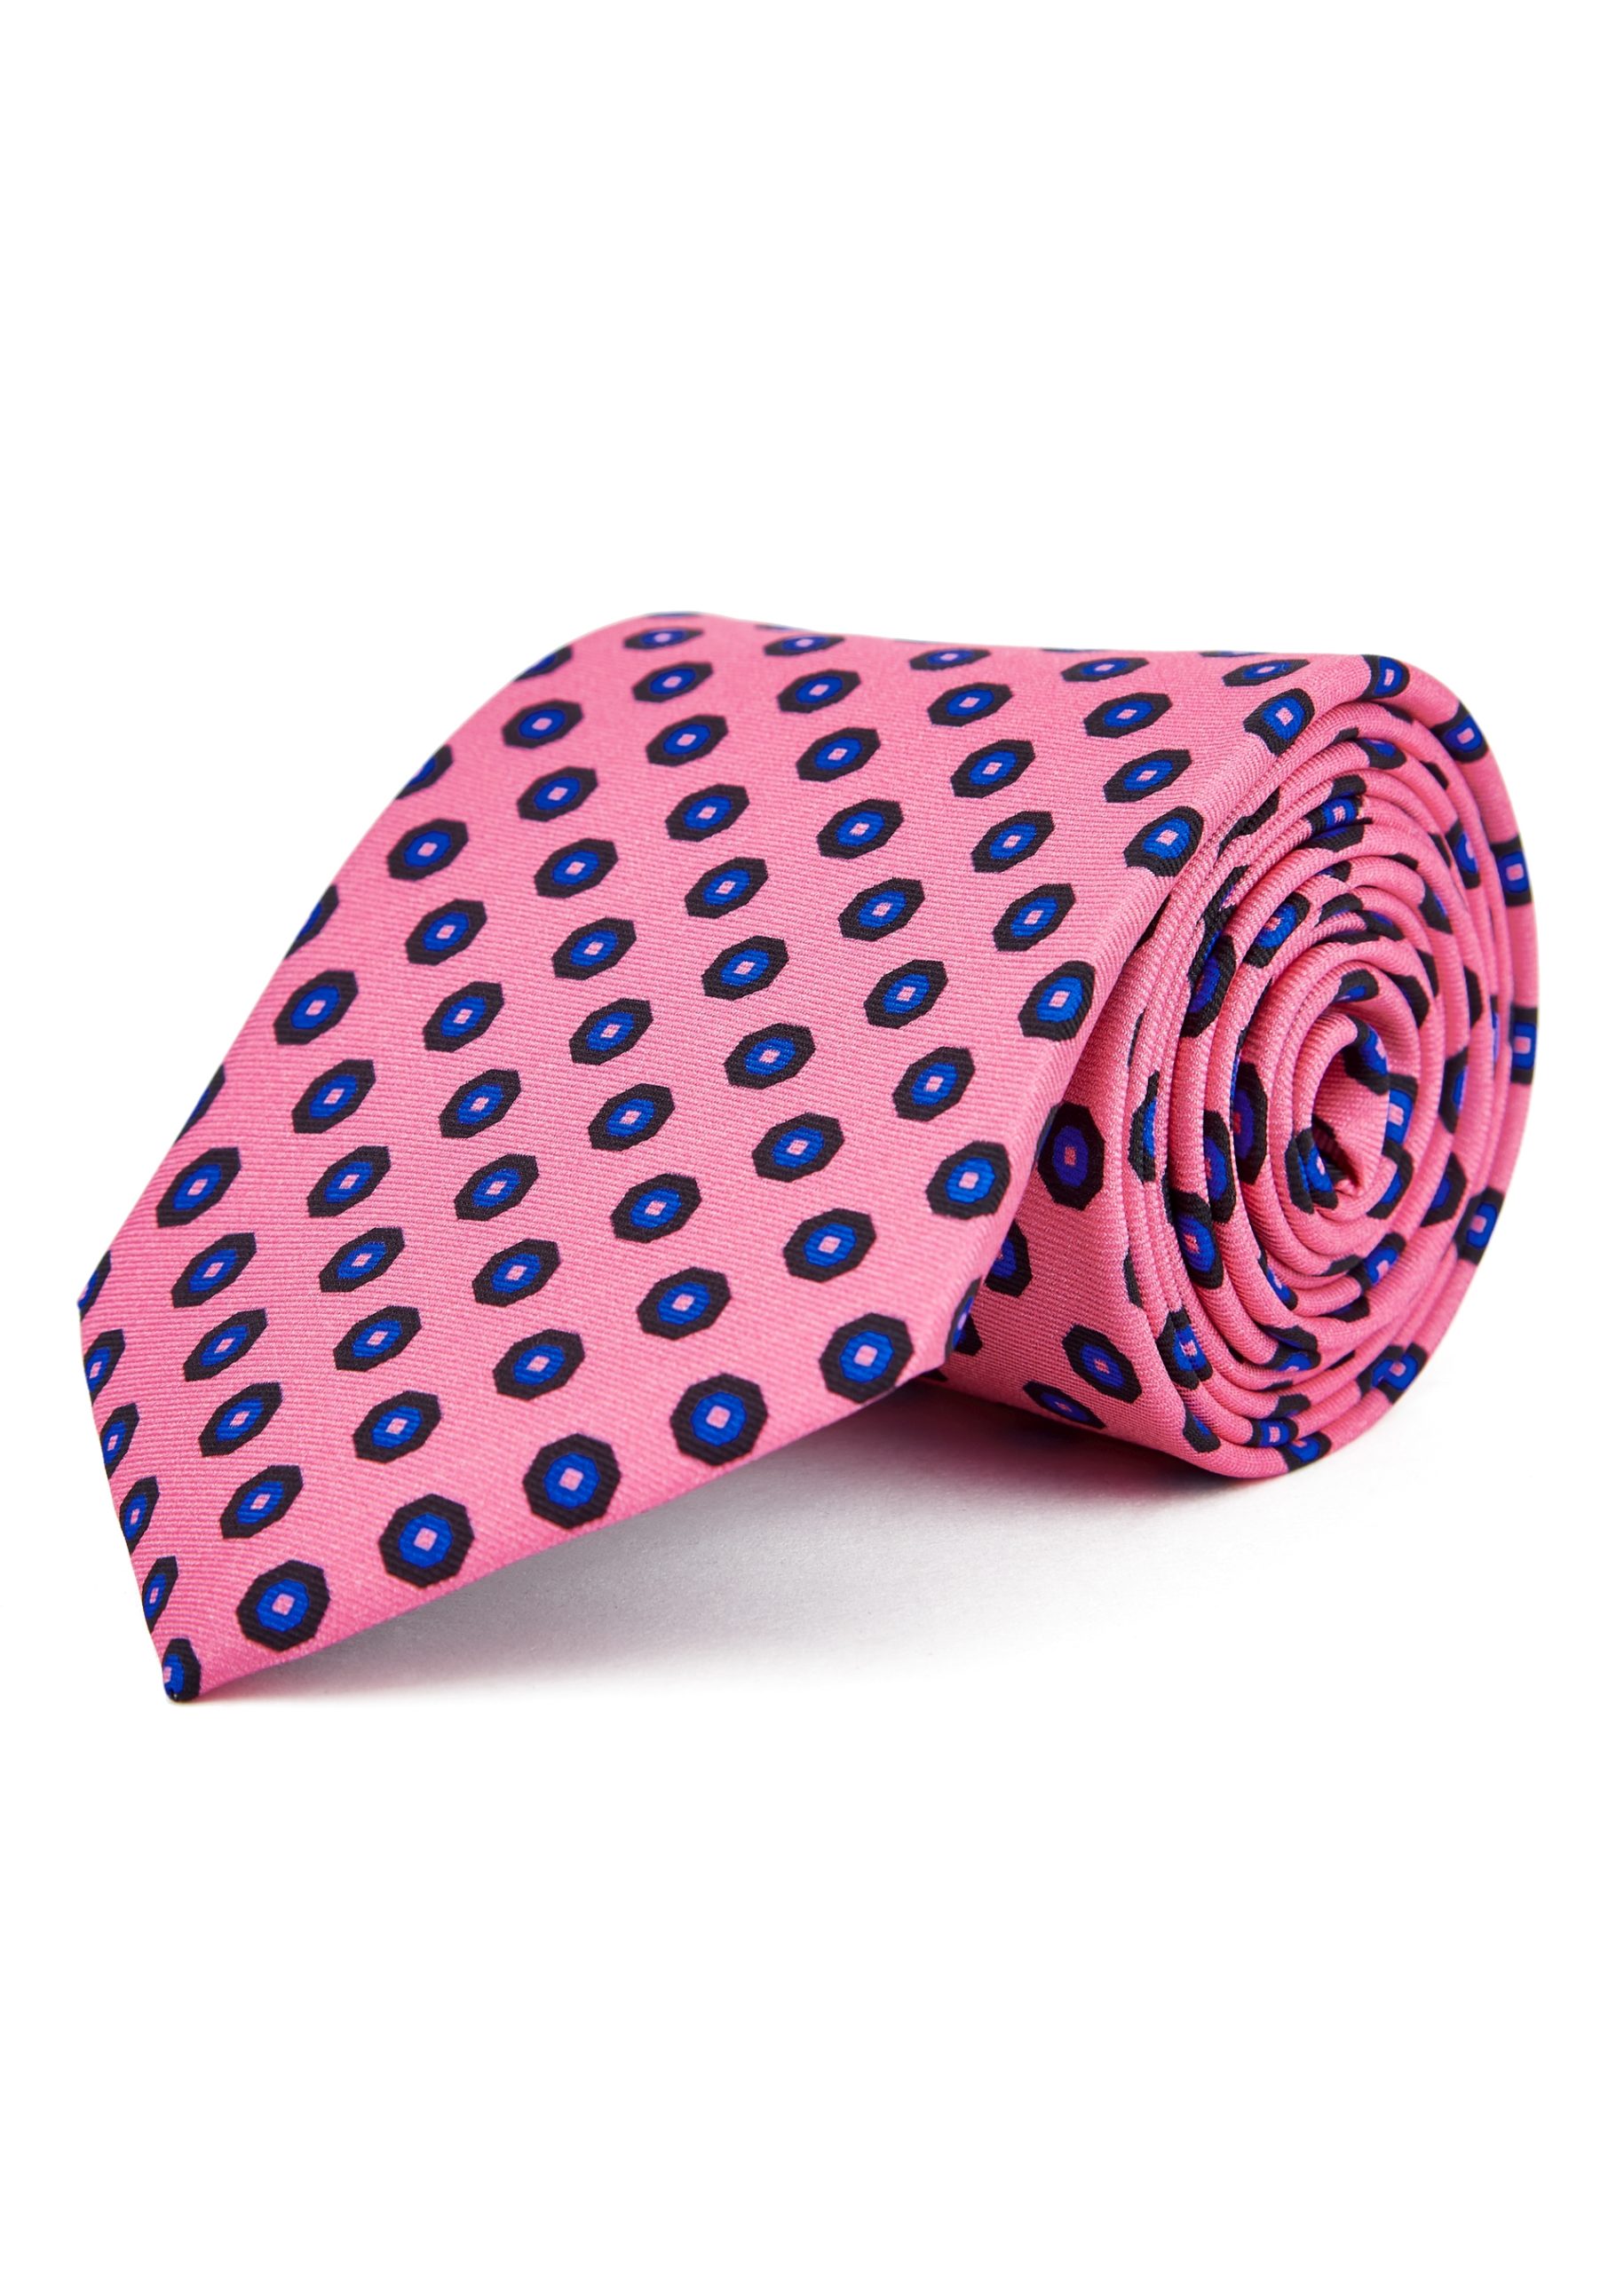 Silk tie in pink with hexagonal patterned